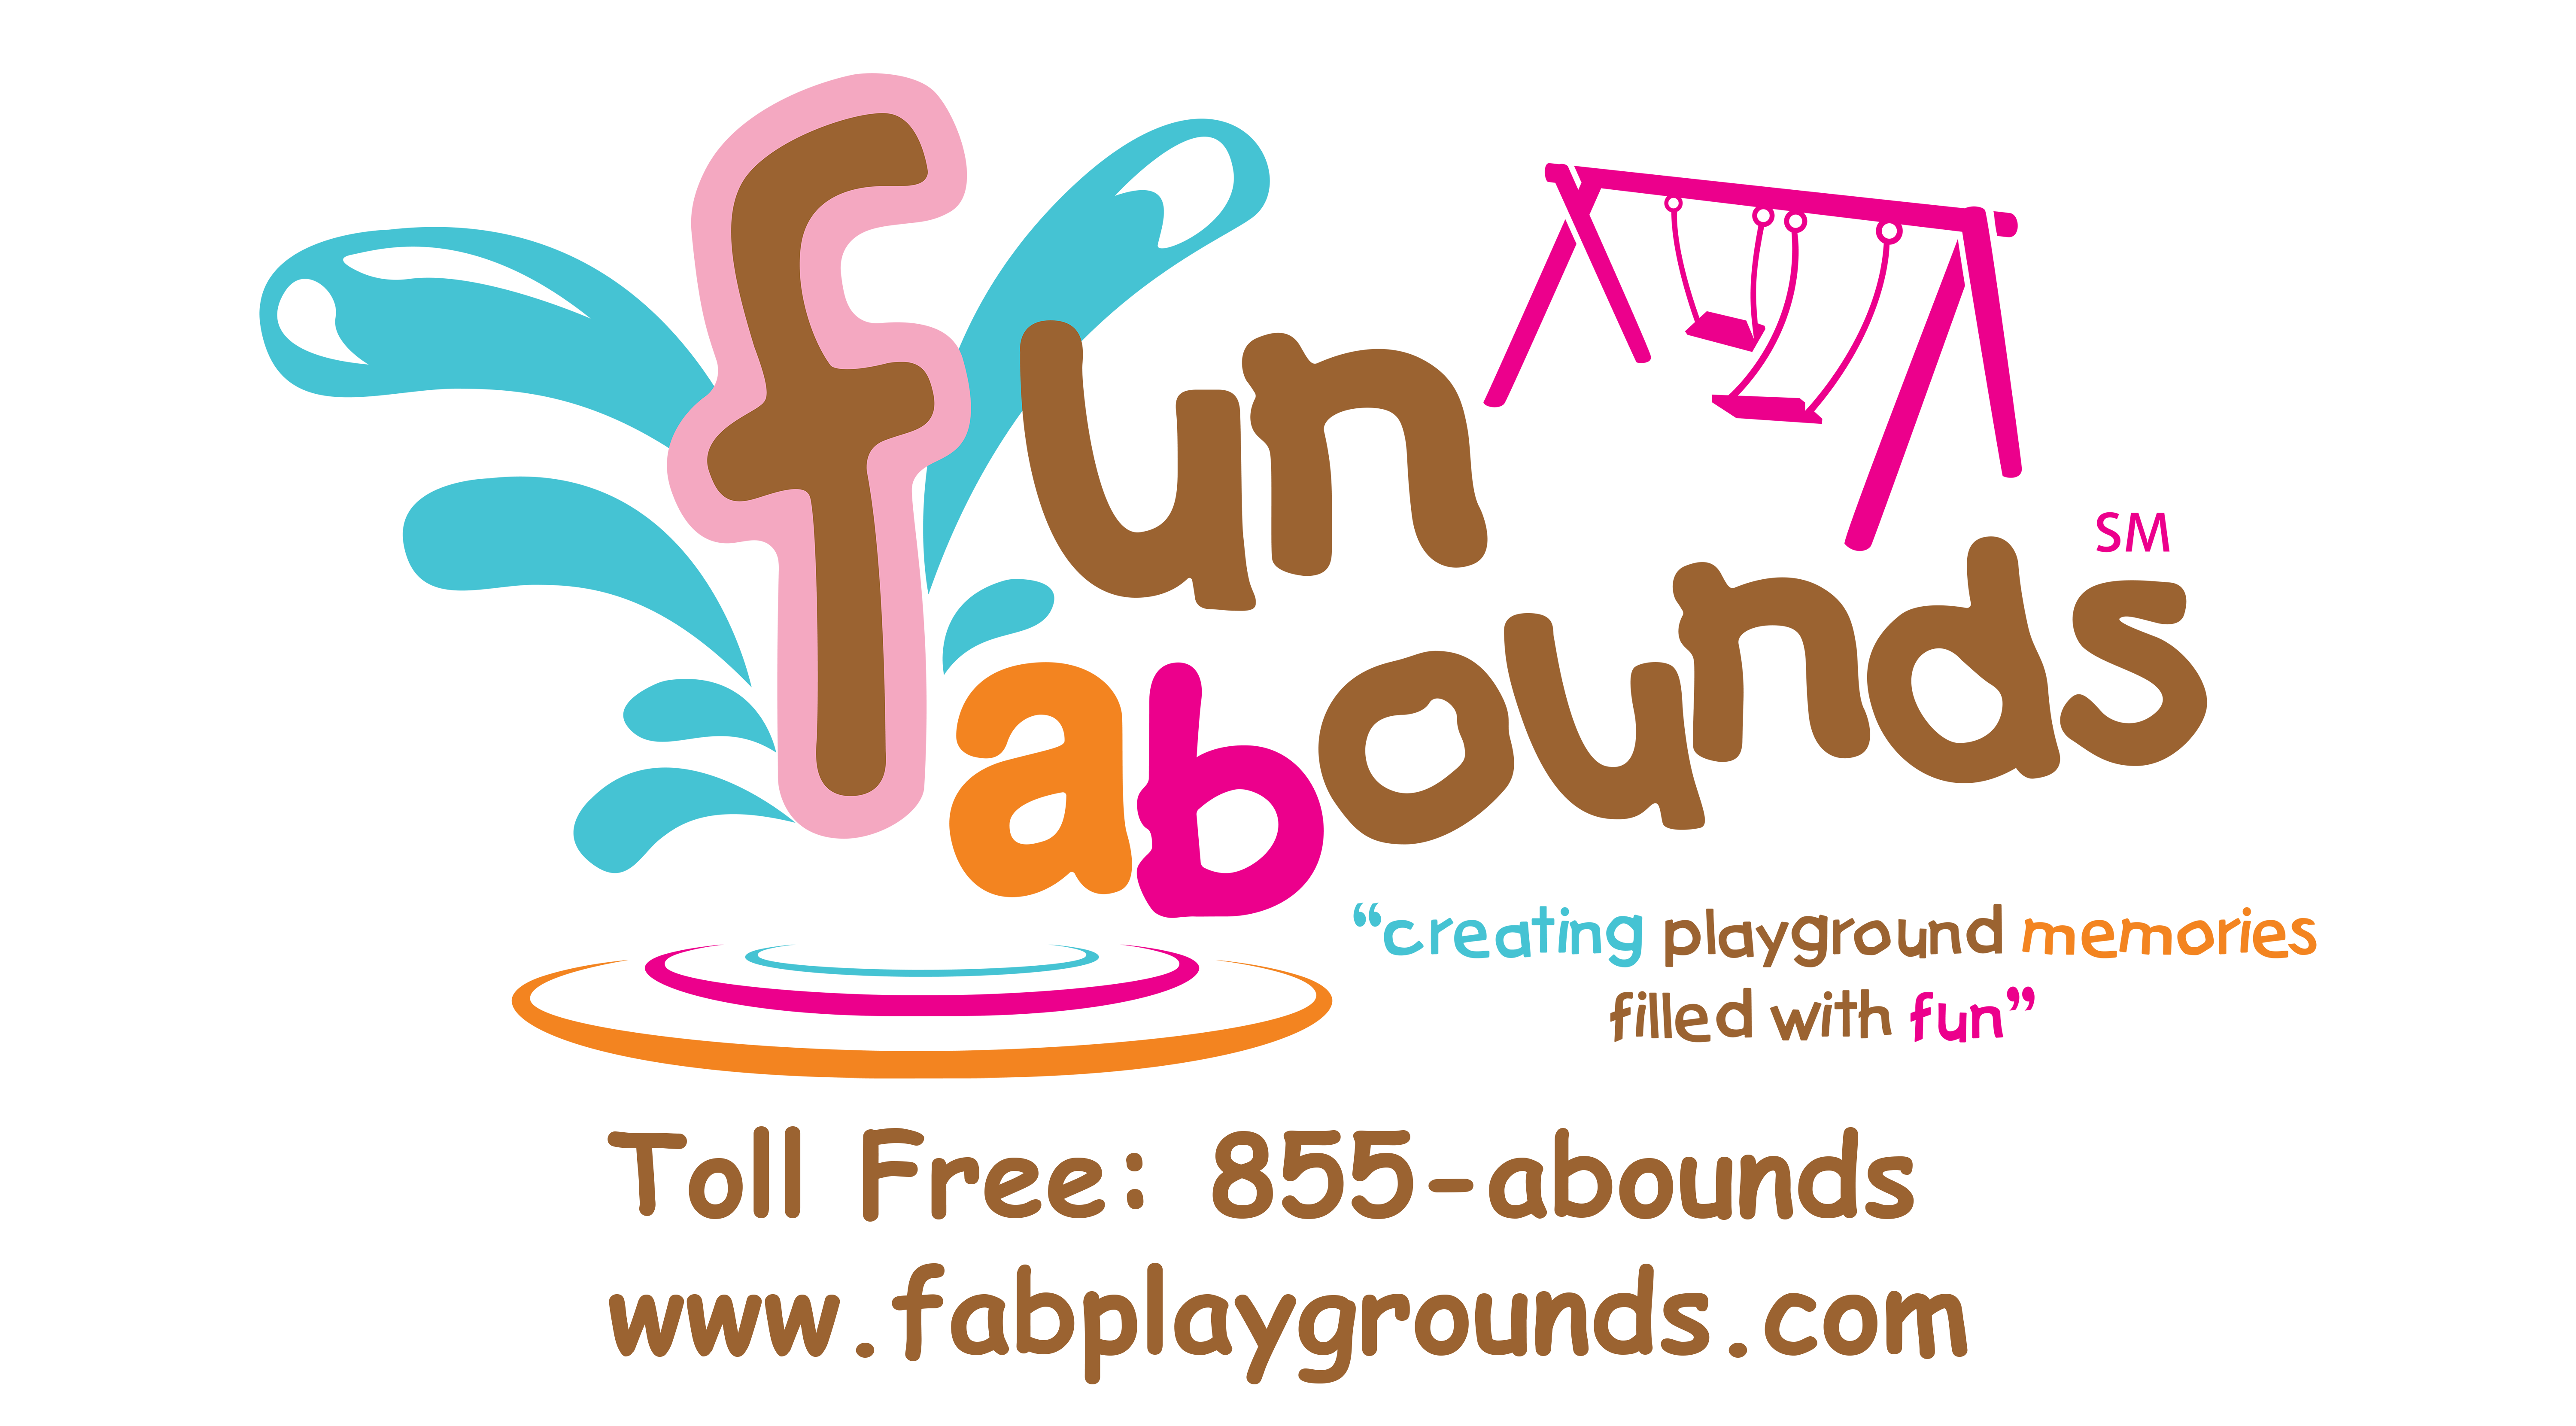 Fab Playgrounds